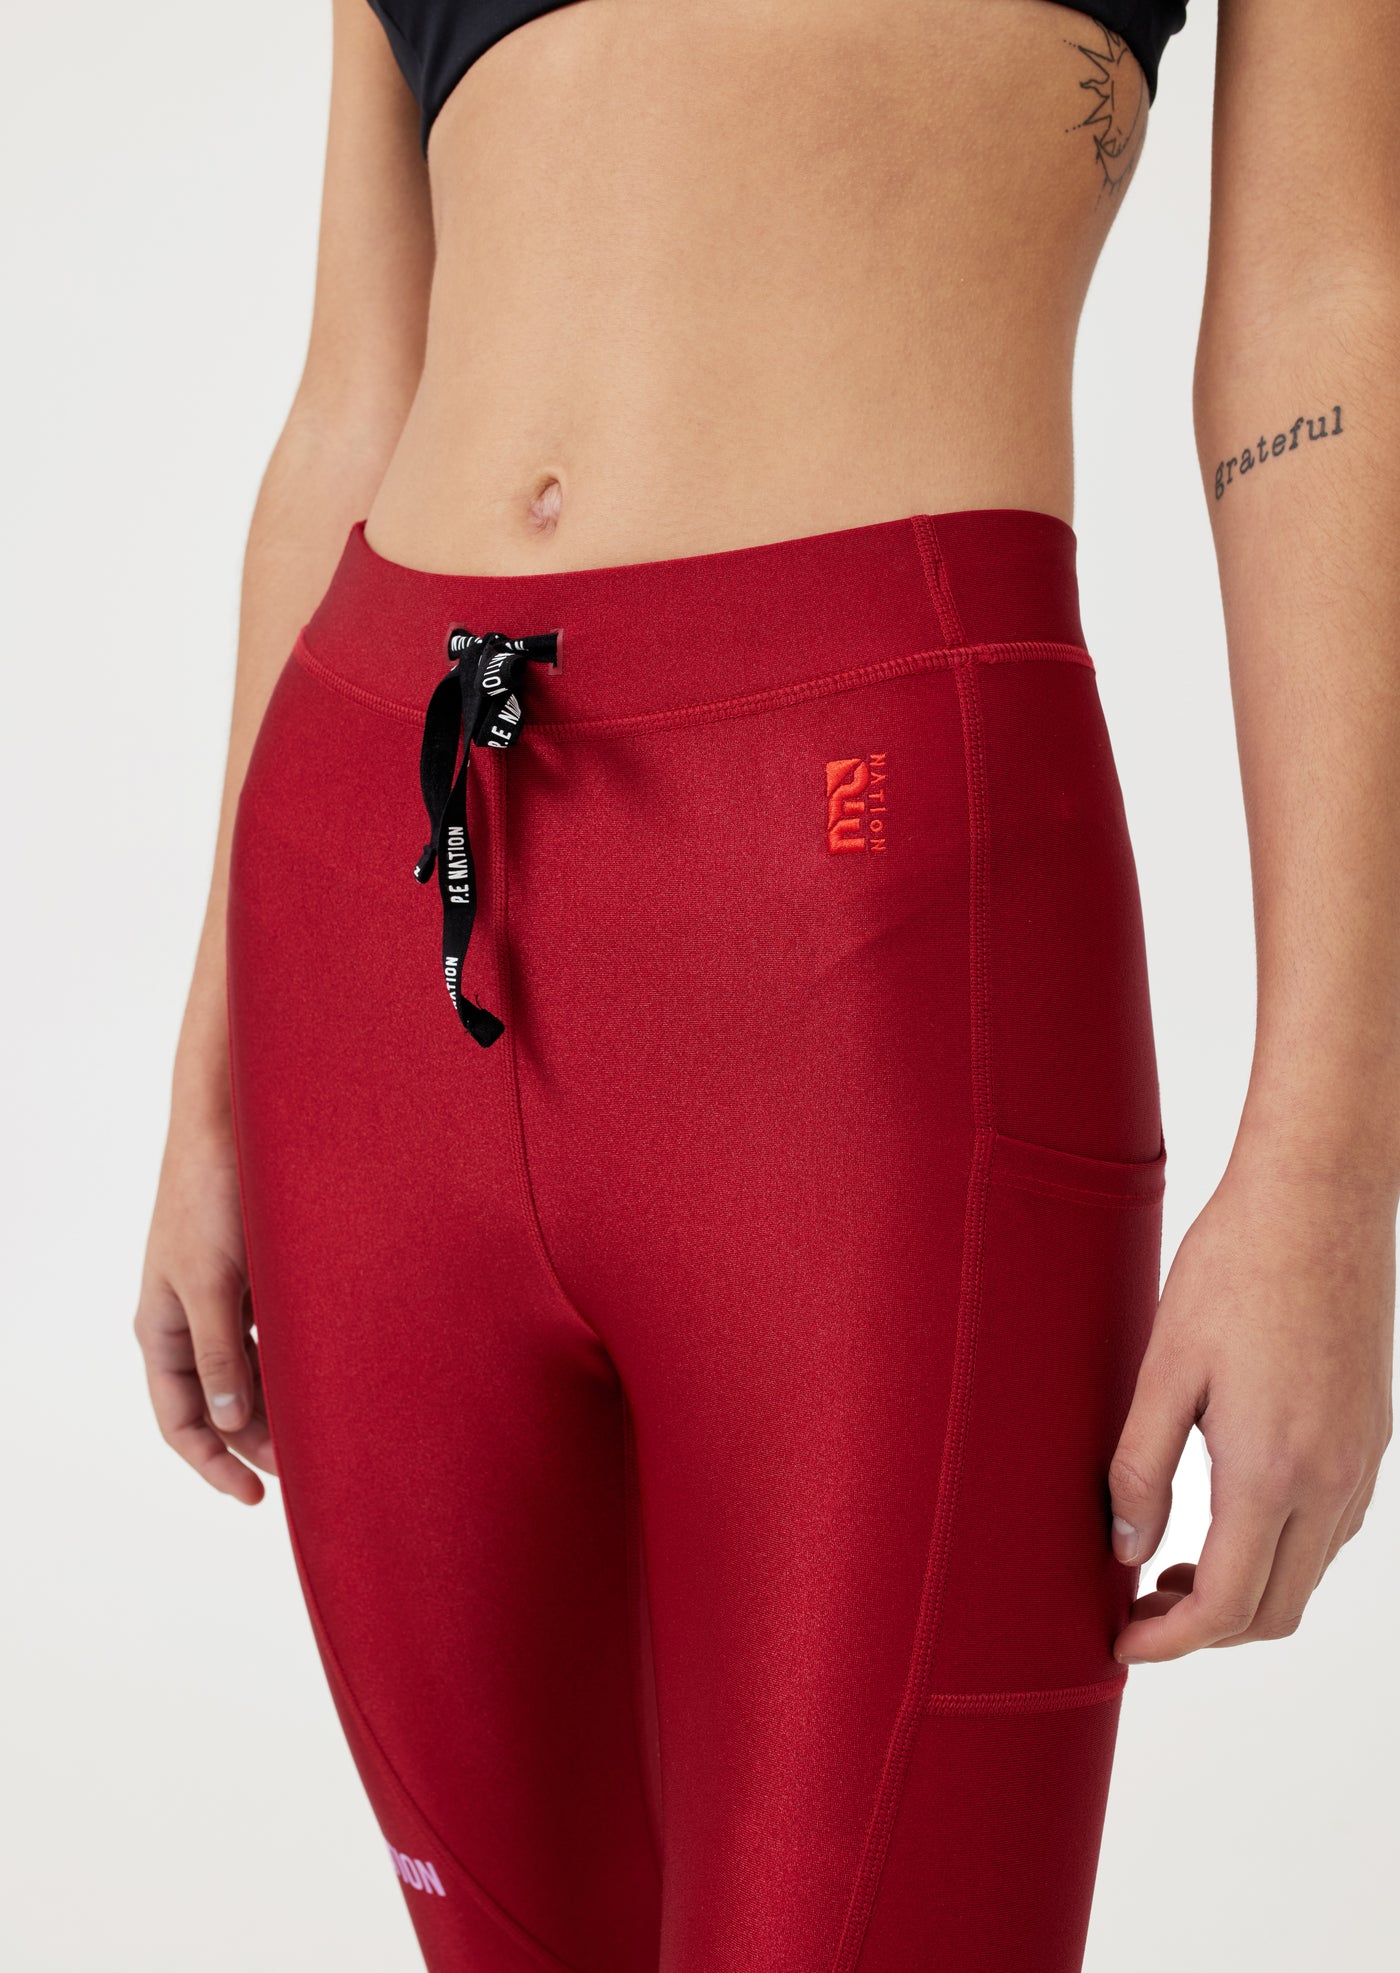 P.E. NATION TITLE GAME LEGGING – FOUR AND NINE